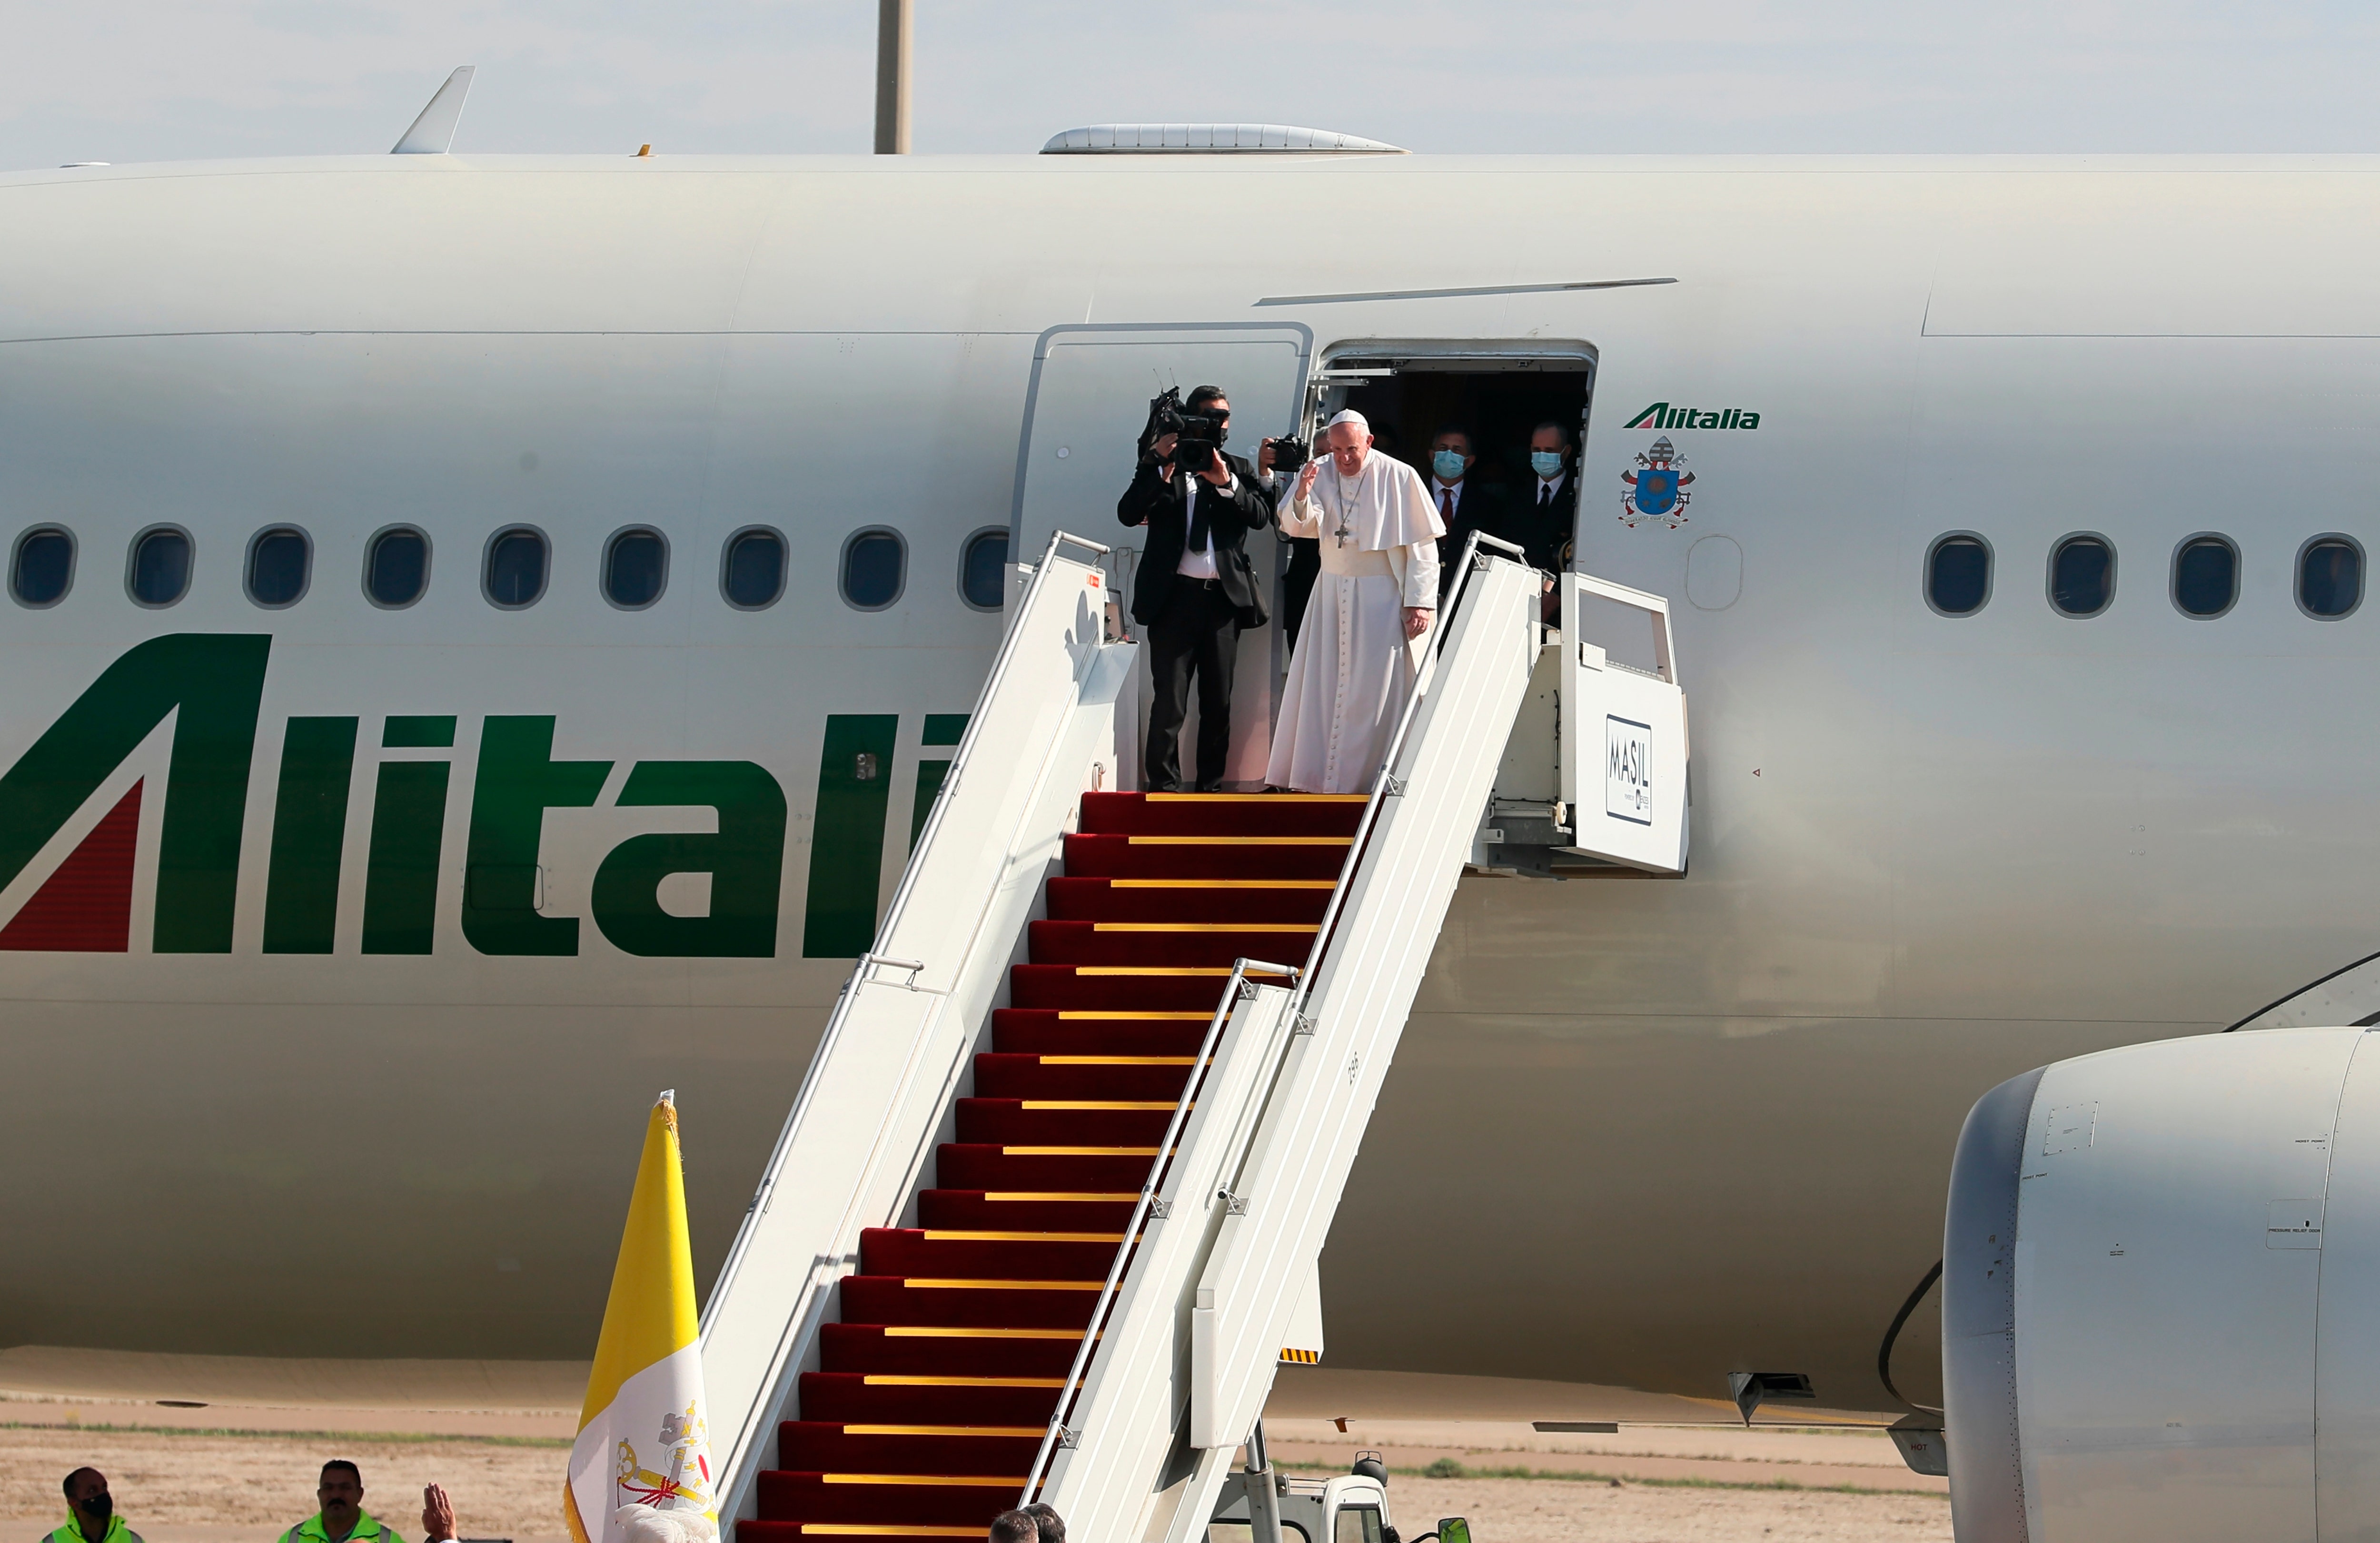 After historic whirlwind visit, Pope leaves Iraq for Rome